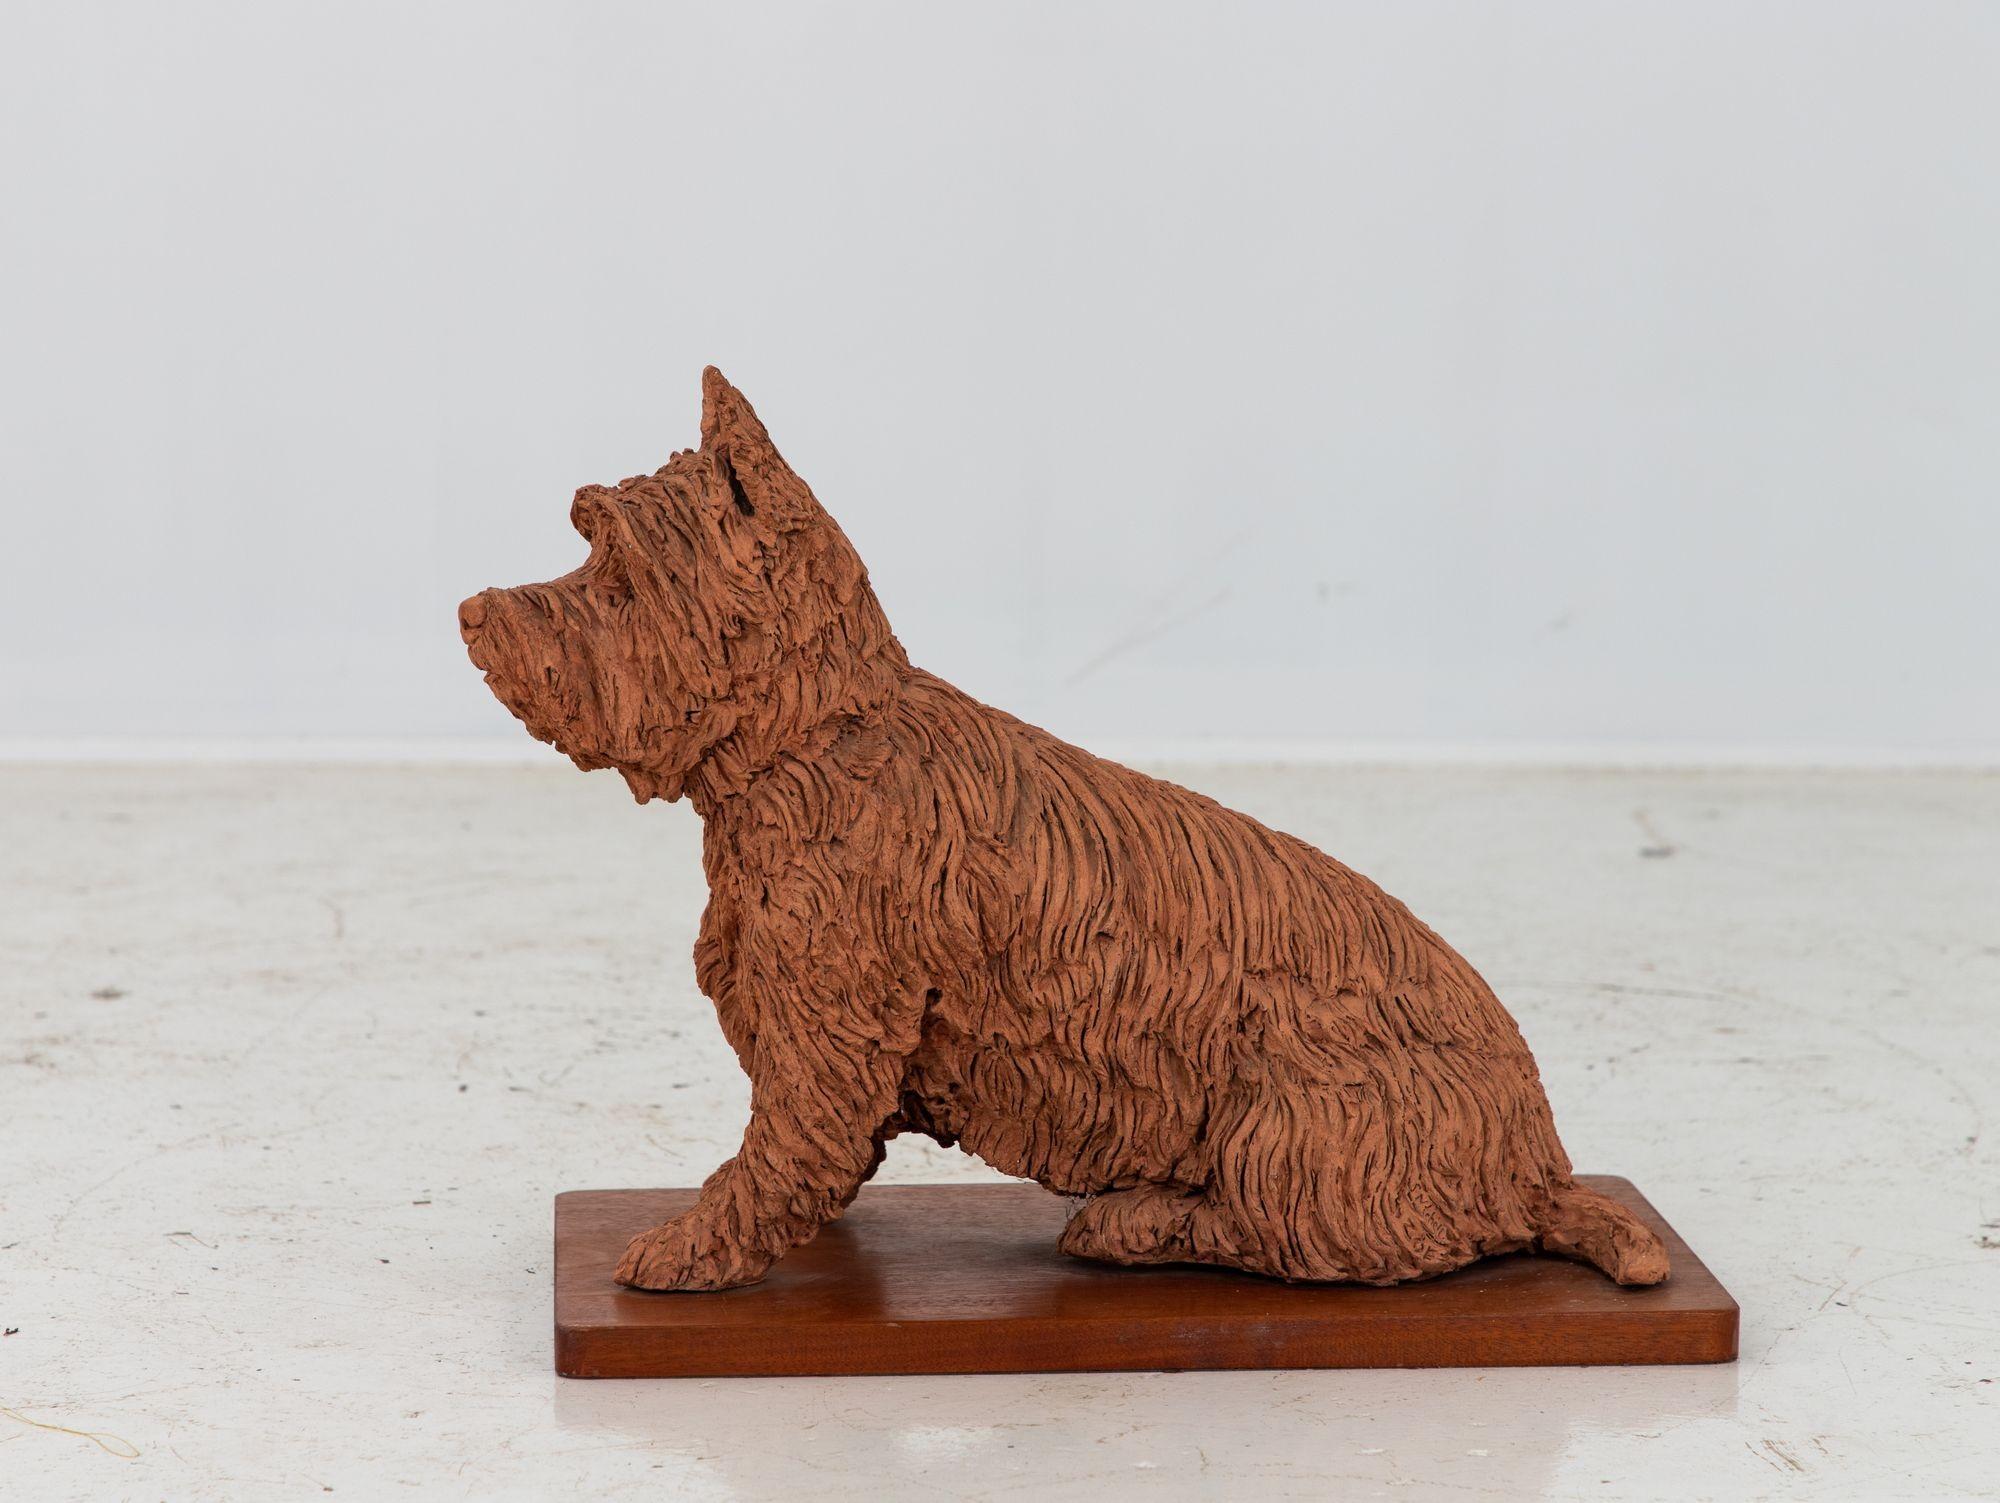 Lifesize terracotta terrier dog statue or garden ornament. English early 20th Century. Wear consistent with age and use.